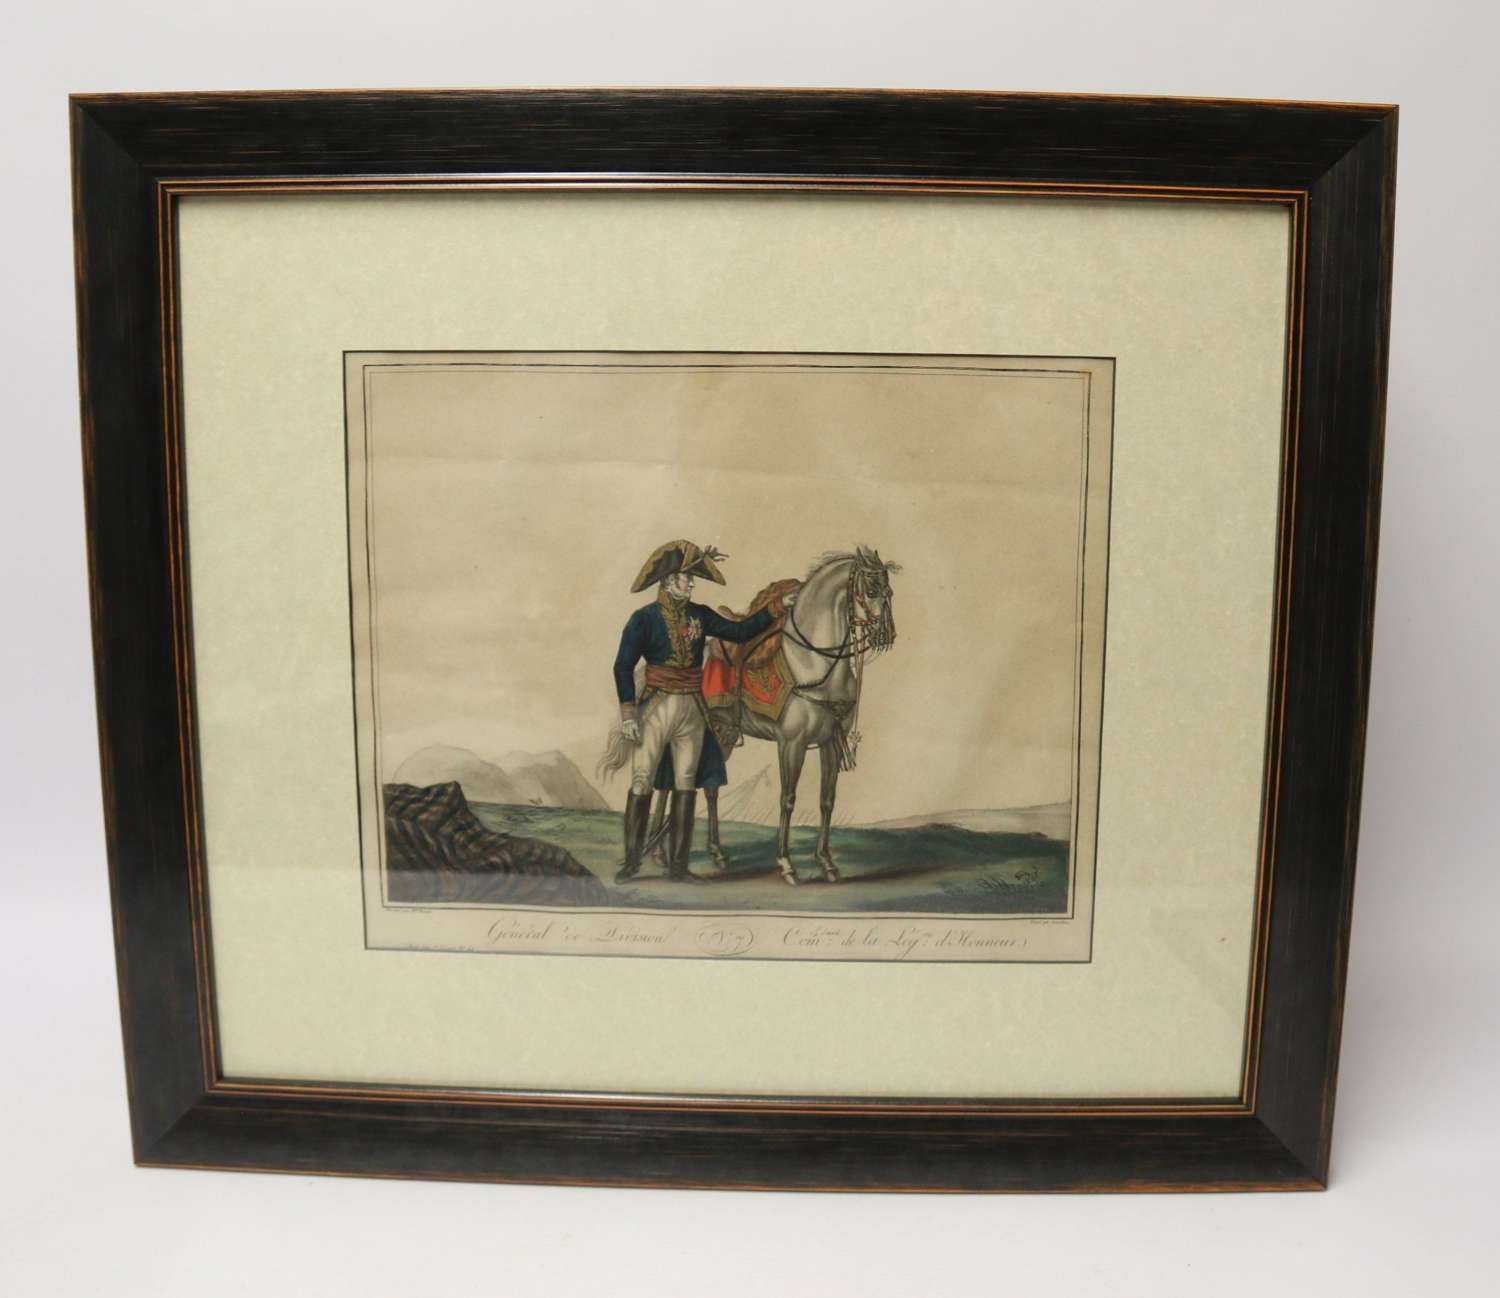 An Early 19th Century Napoleonic Period French Military Hand Coloured Print.